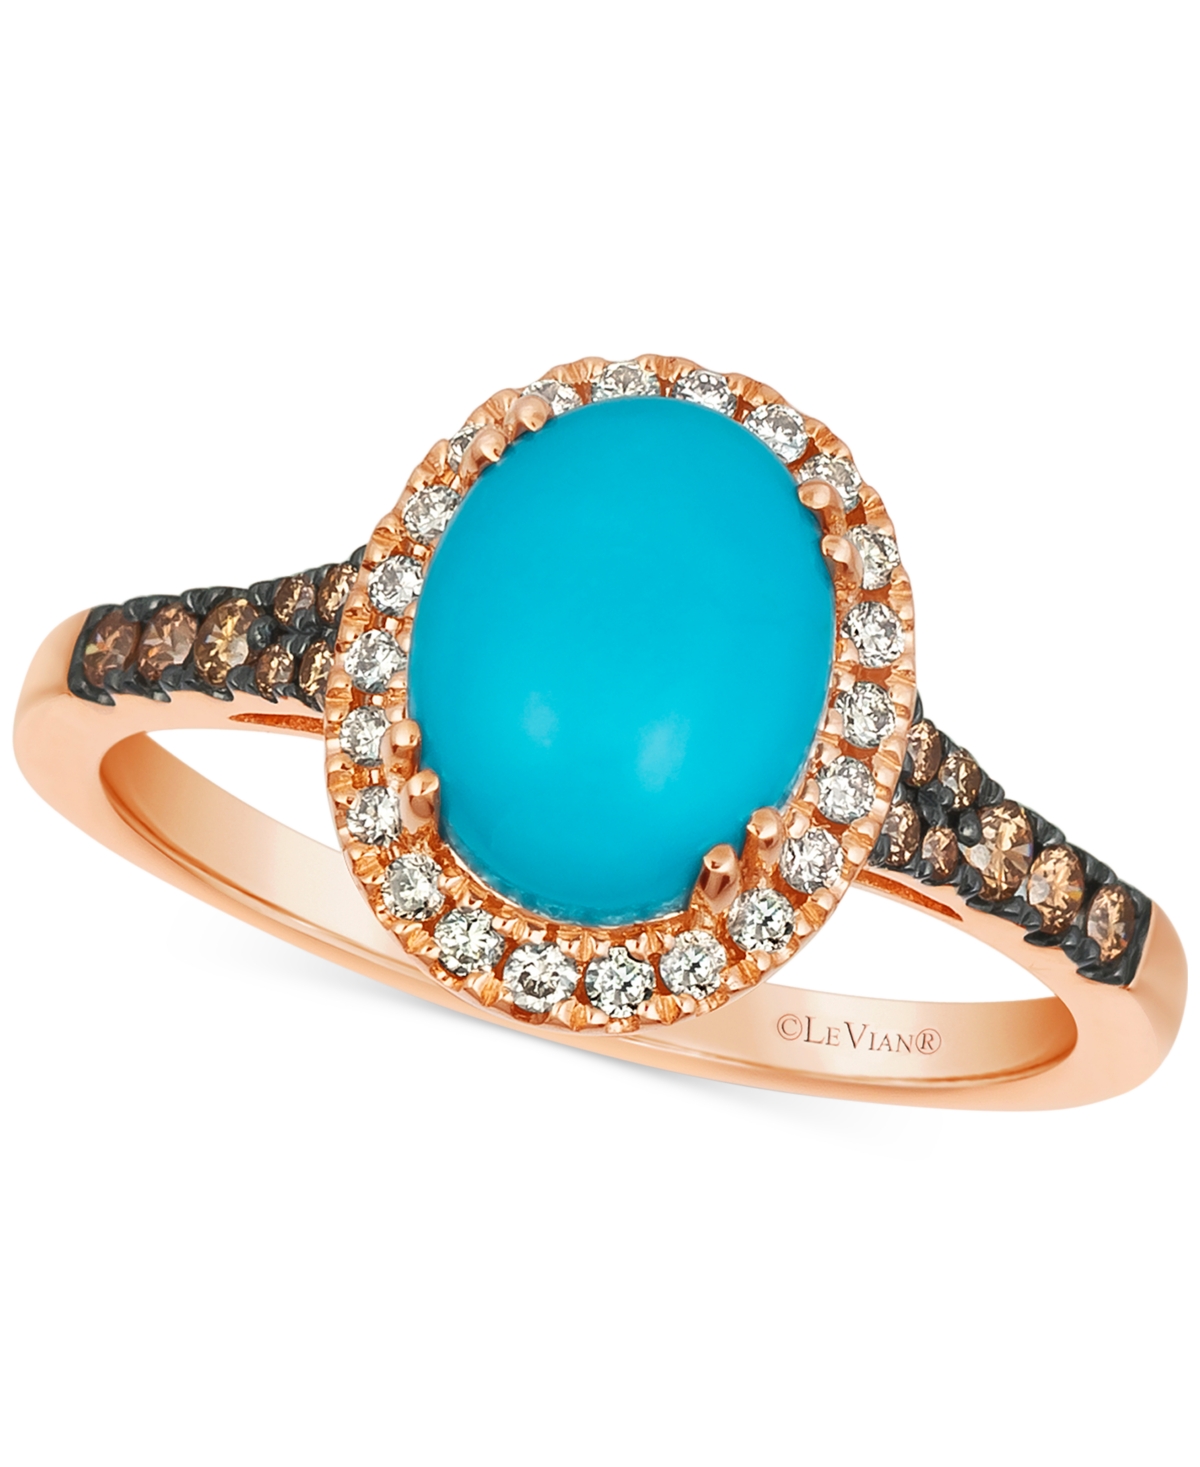 Le Vian Robins Egg Blue Turquoise (2 Ct. T.w.) & Diamond (1/3 Ct. T.w.) Halo Ring In 14k Rose Gold In K Rg